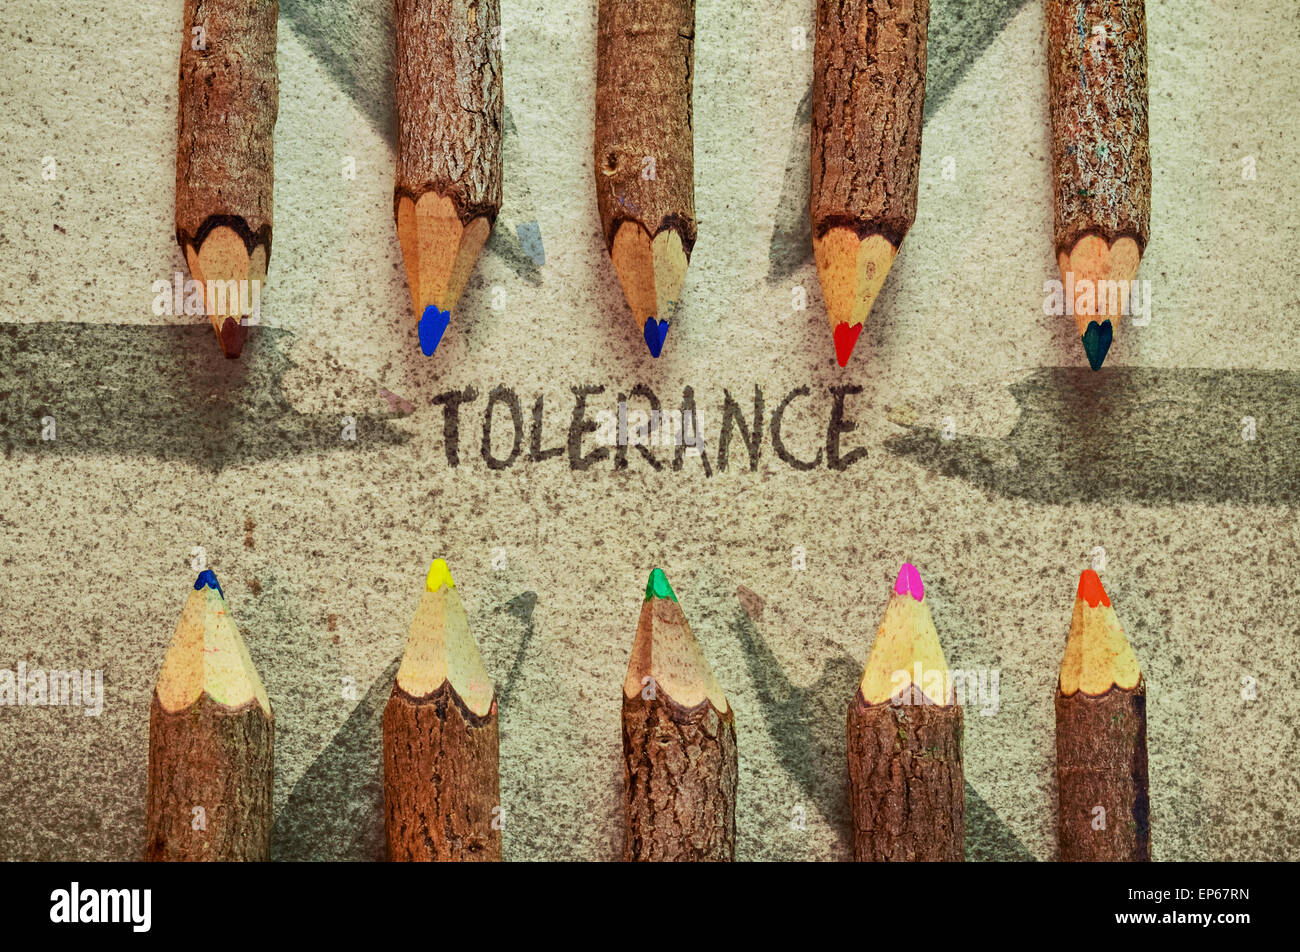 Conceptual image with pencils on vintage background as an appeal for tolerance Stock Photo